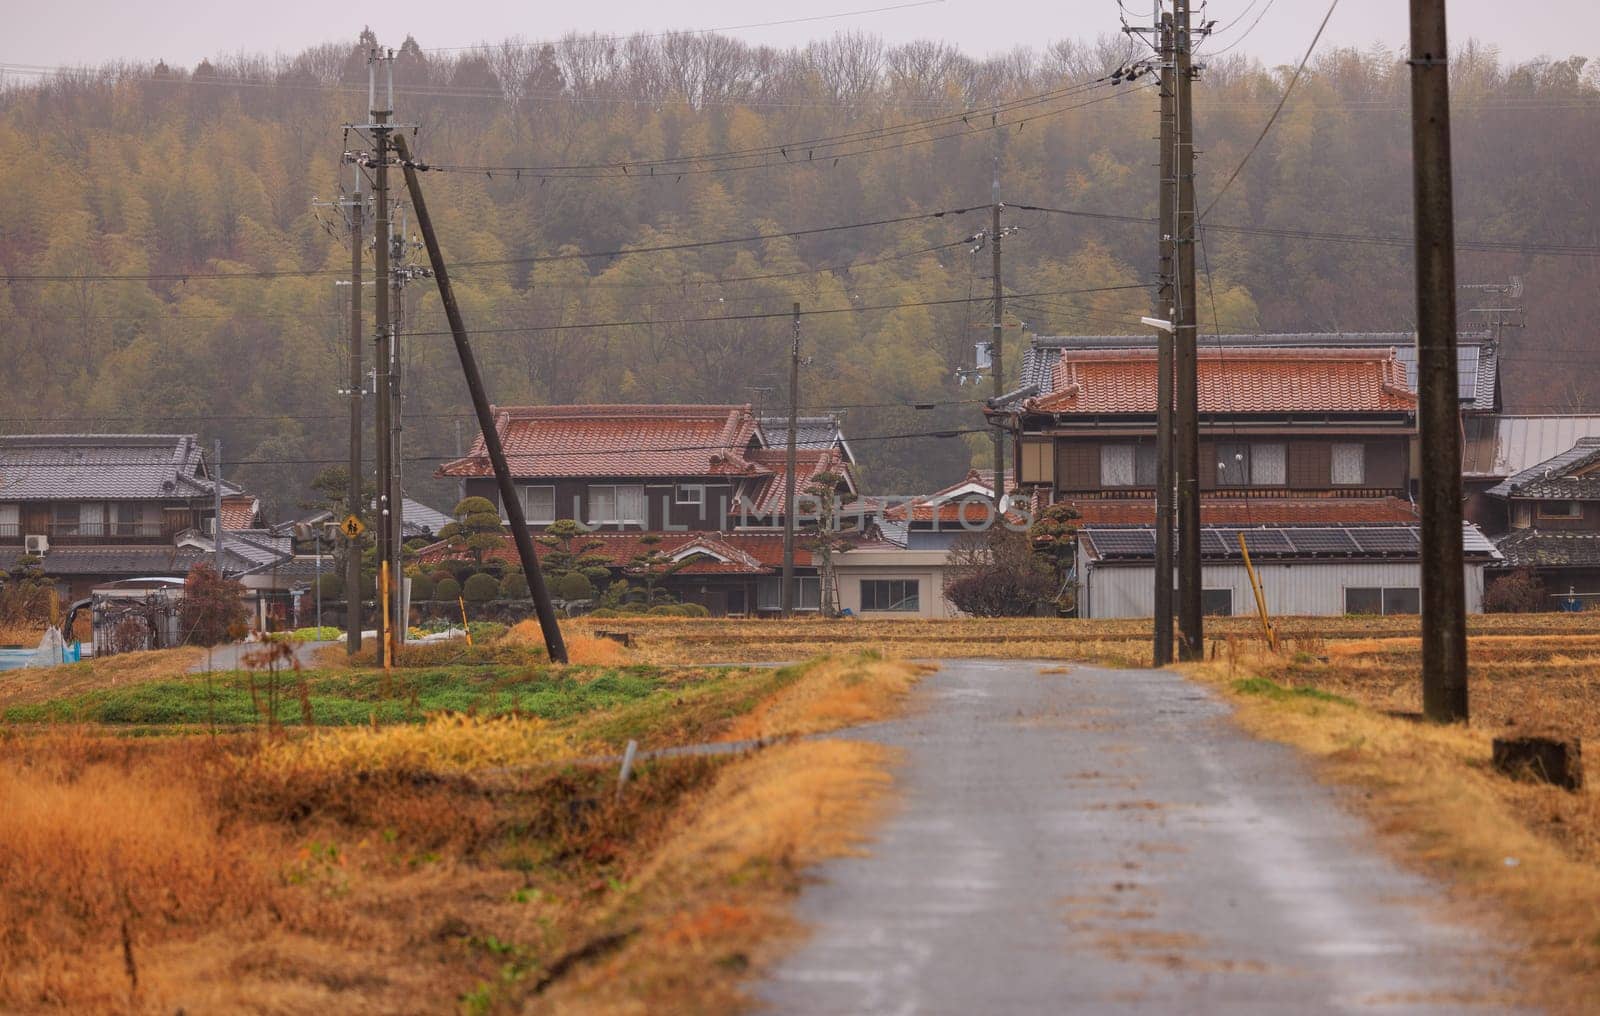 Traditional Japanese Houses next to Golden Fields on Rainy Winter Day by Osaze